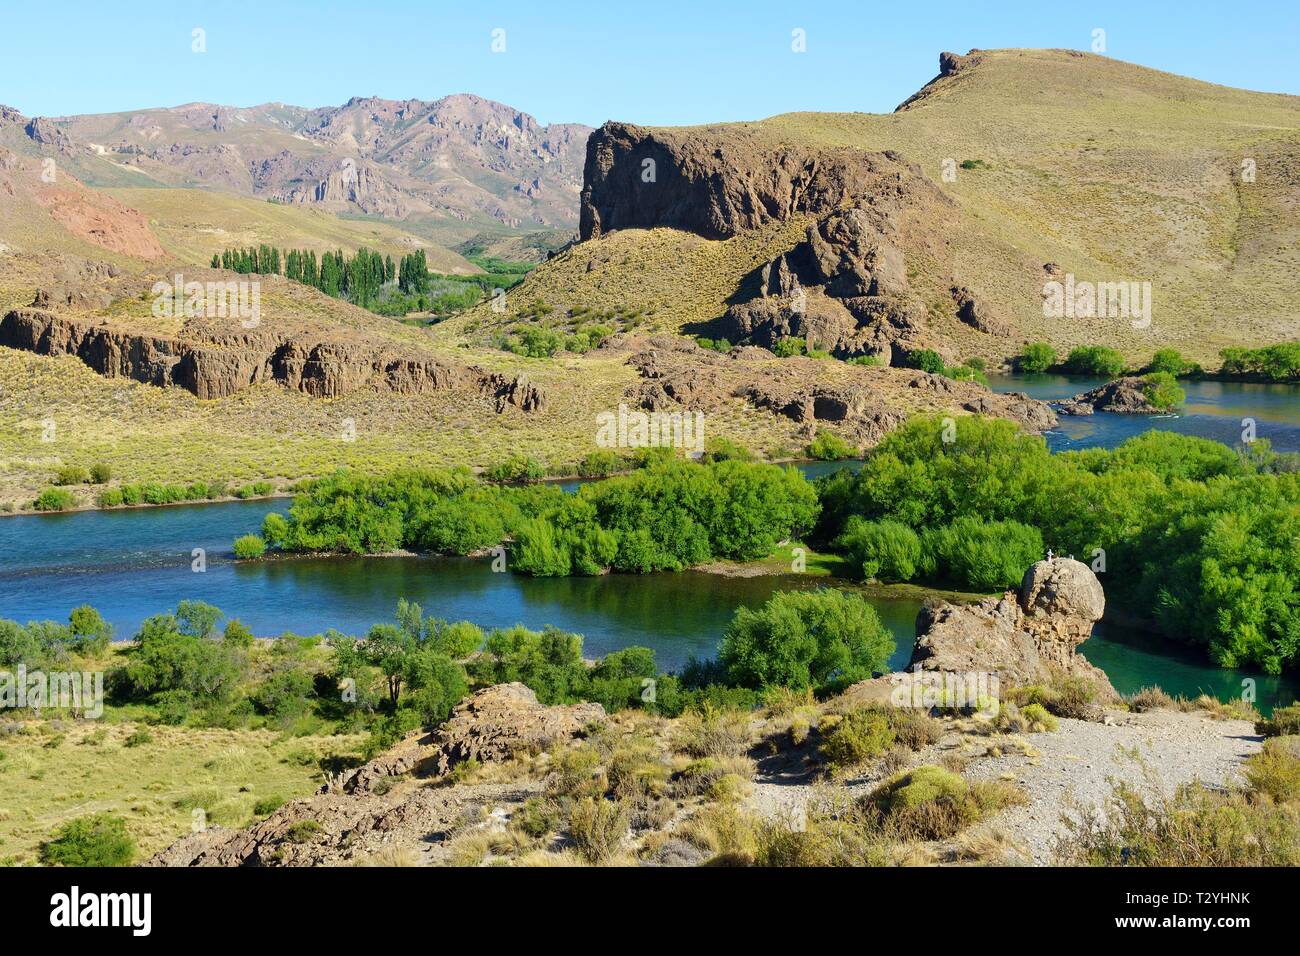 Green valley at Rio Limay, Valle Encantado, Andes, Province of Neuquen, Patagonia, Argentina Stock Photo